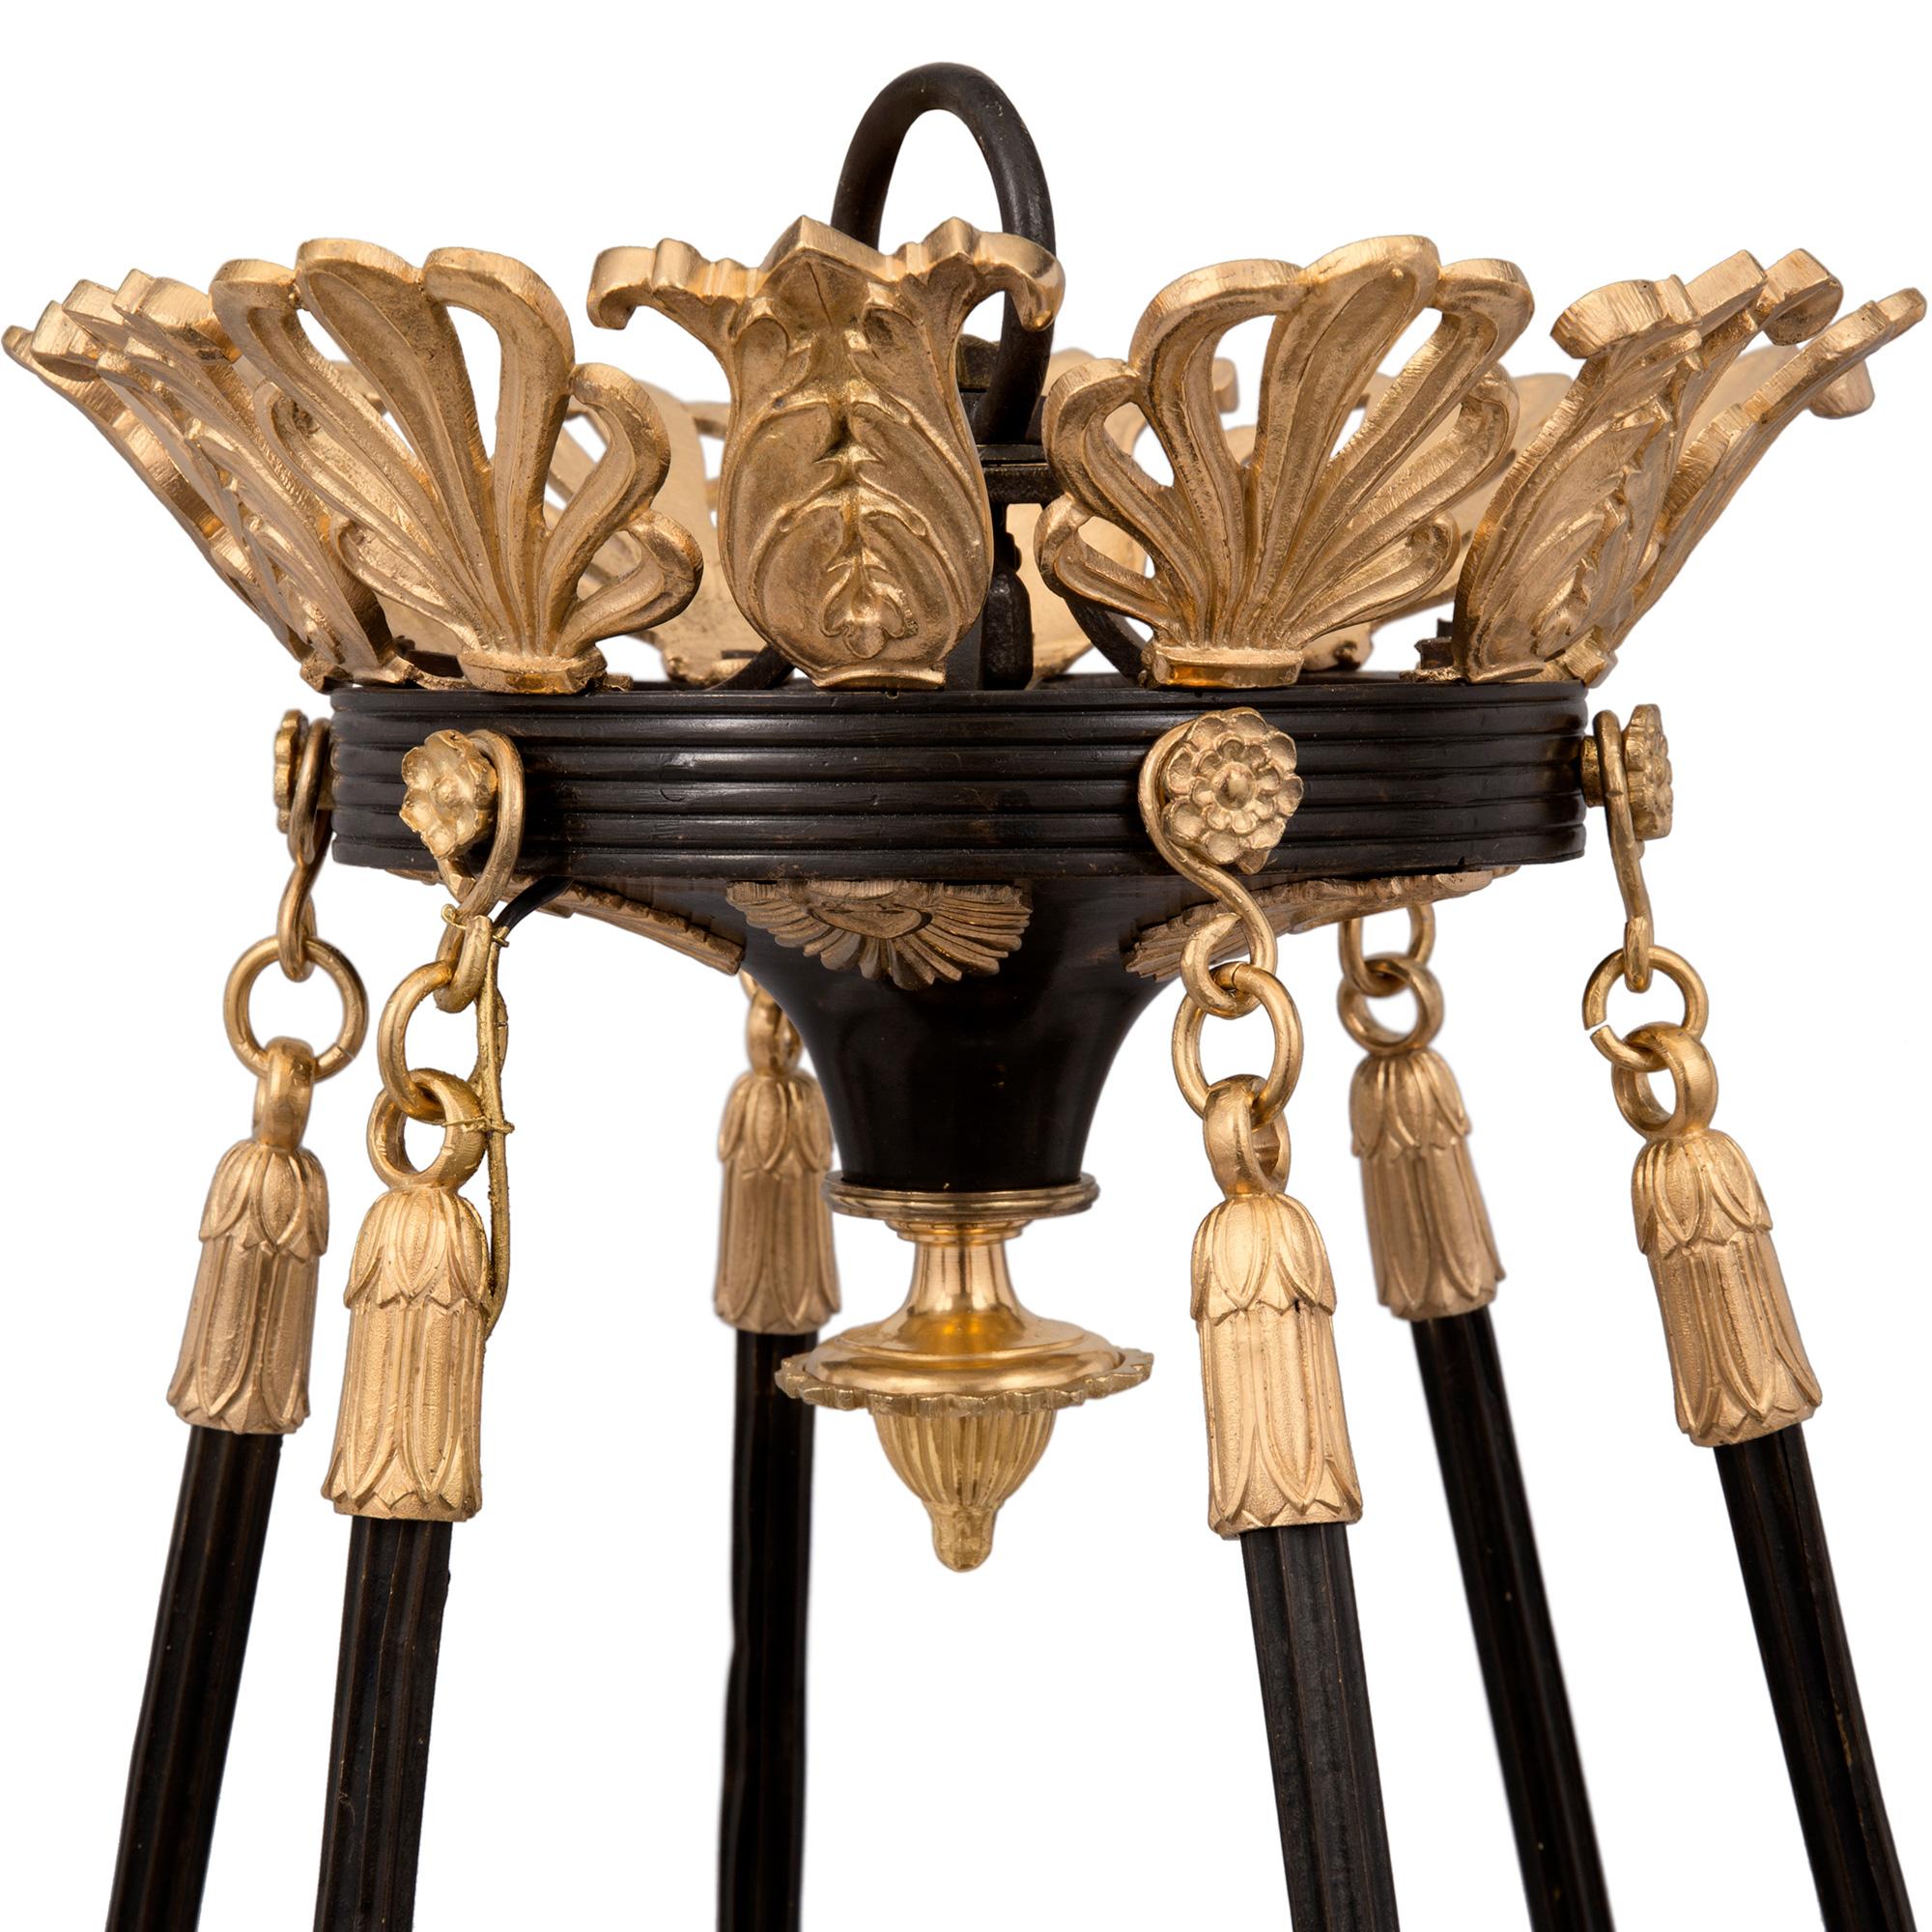 French 19th Century Neoclassical Style Patinated Bronze and Ormolu Chandelier For Sale 1